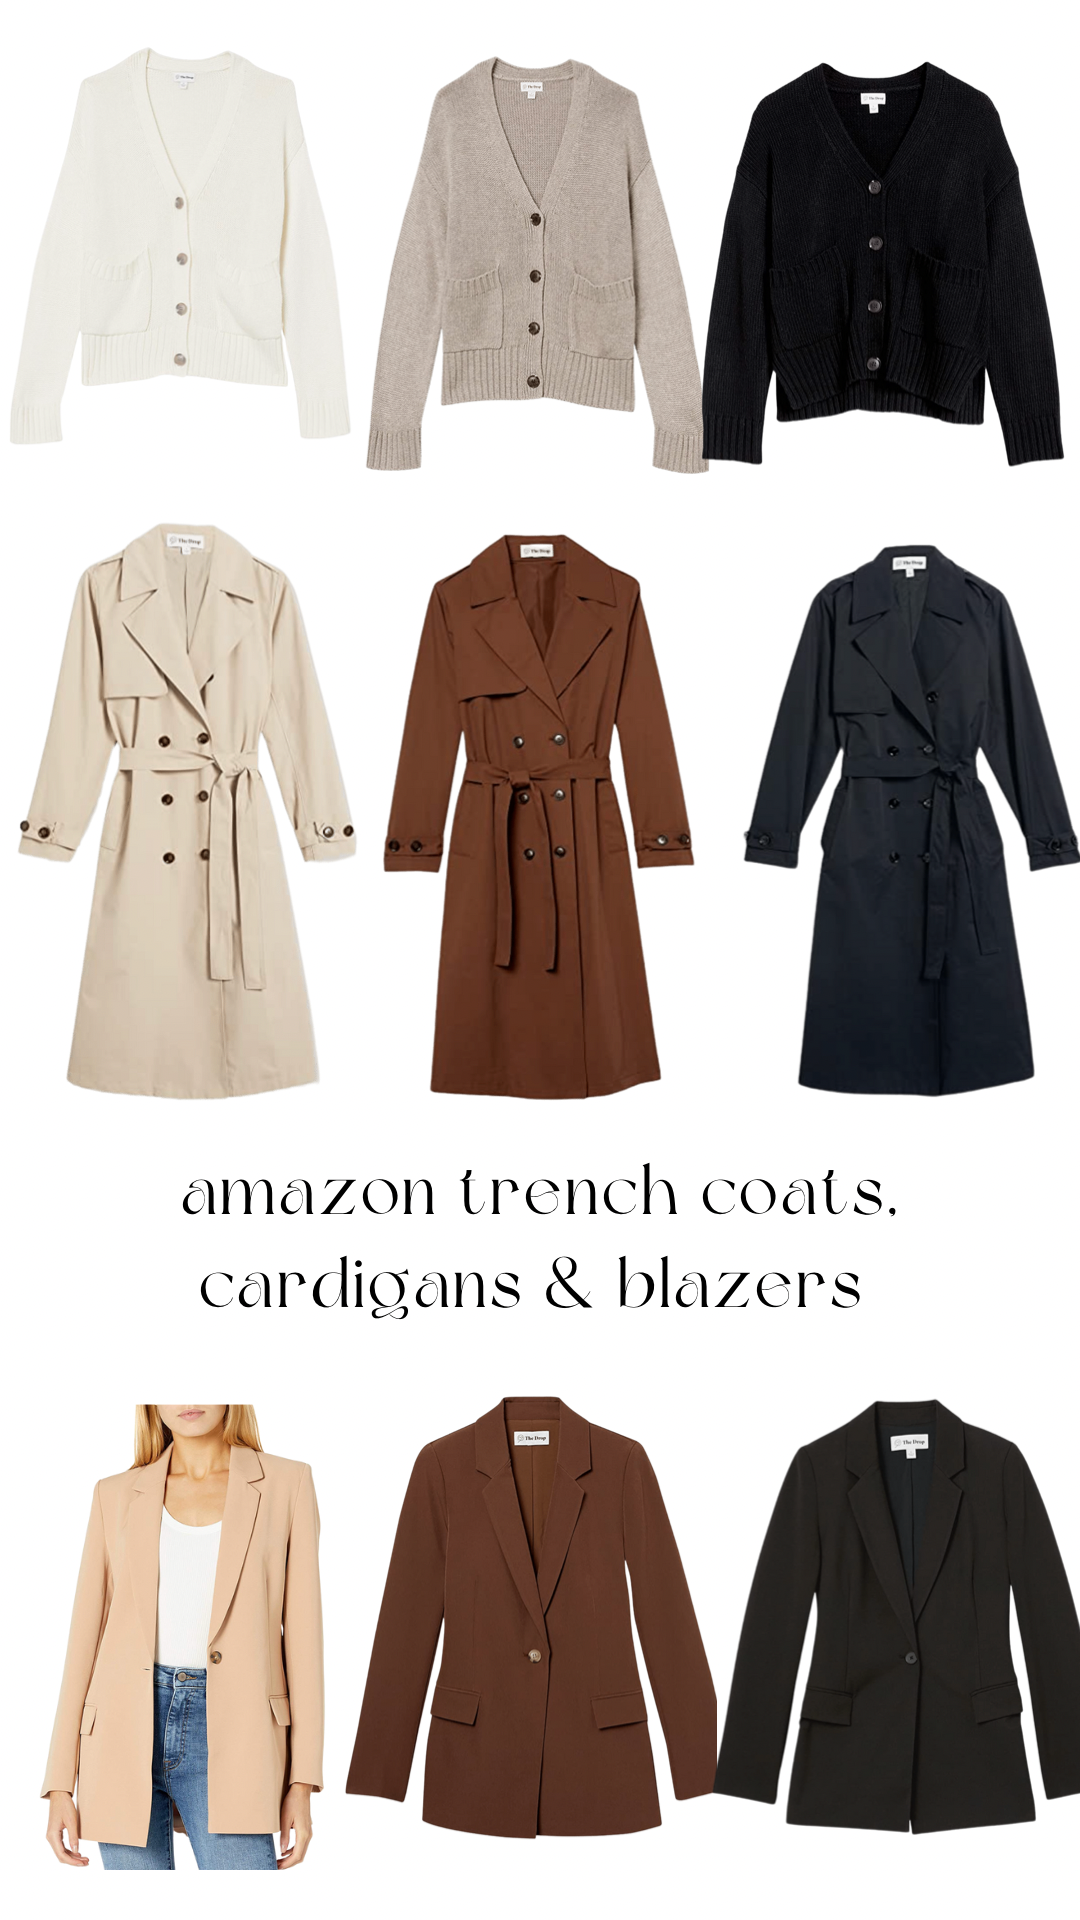 The Best of Amazon Prime Day 2022 | Amazon Home Finds | Amazon Beauty Finds | How To Shop Amazon Prime Day | What To Buy Amazon Prime Day | Best Amazon Prime Day Deals | Amazon Shopping Guide | Amazon Fall Capsule Wardrobe | What To Wear This Fall 2022 | Amazon Fashion Finds | Outerwear | Simply by Simone